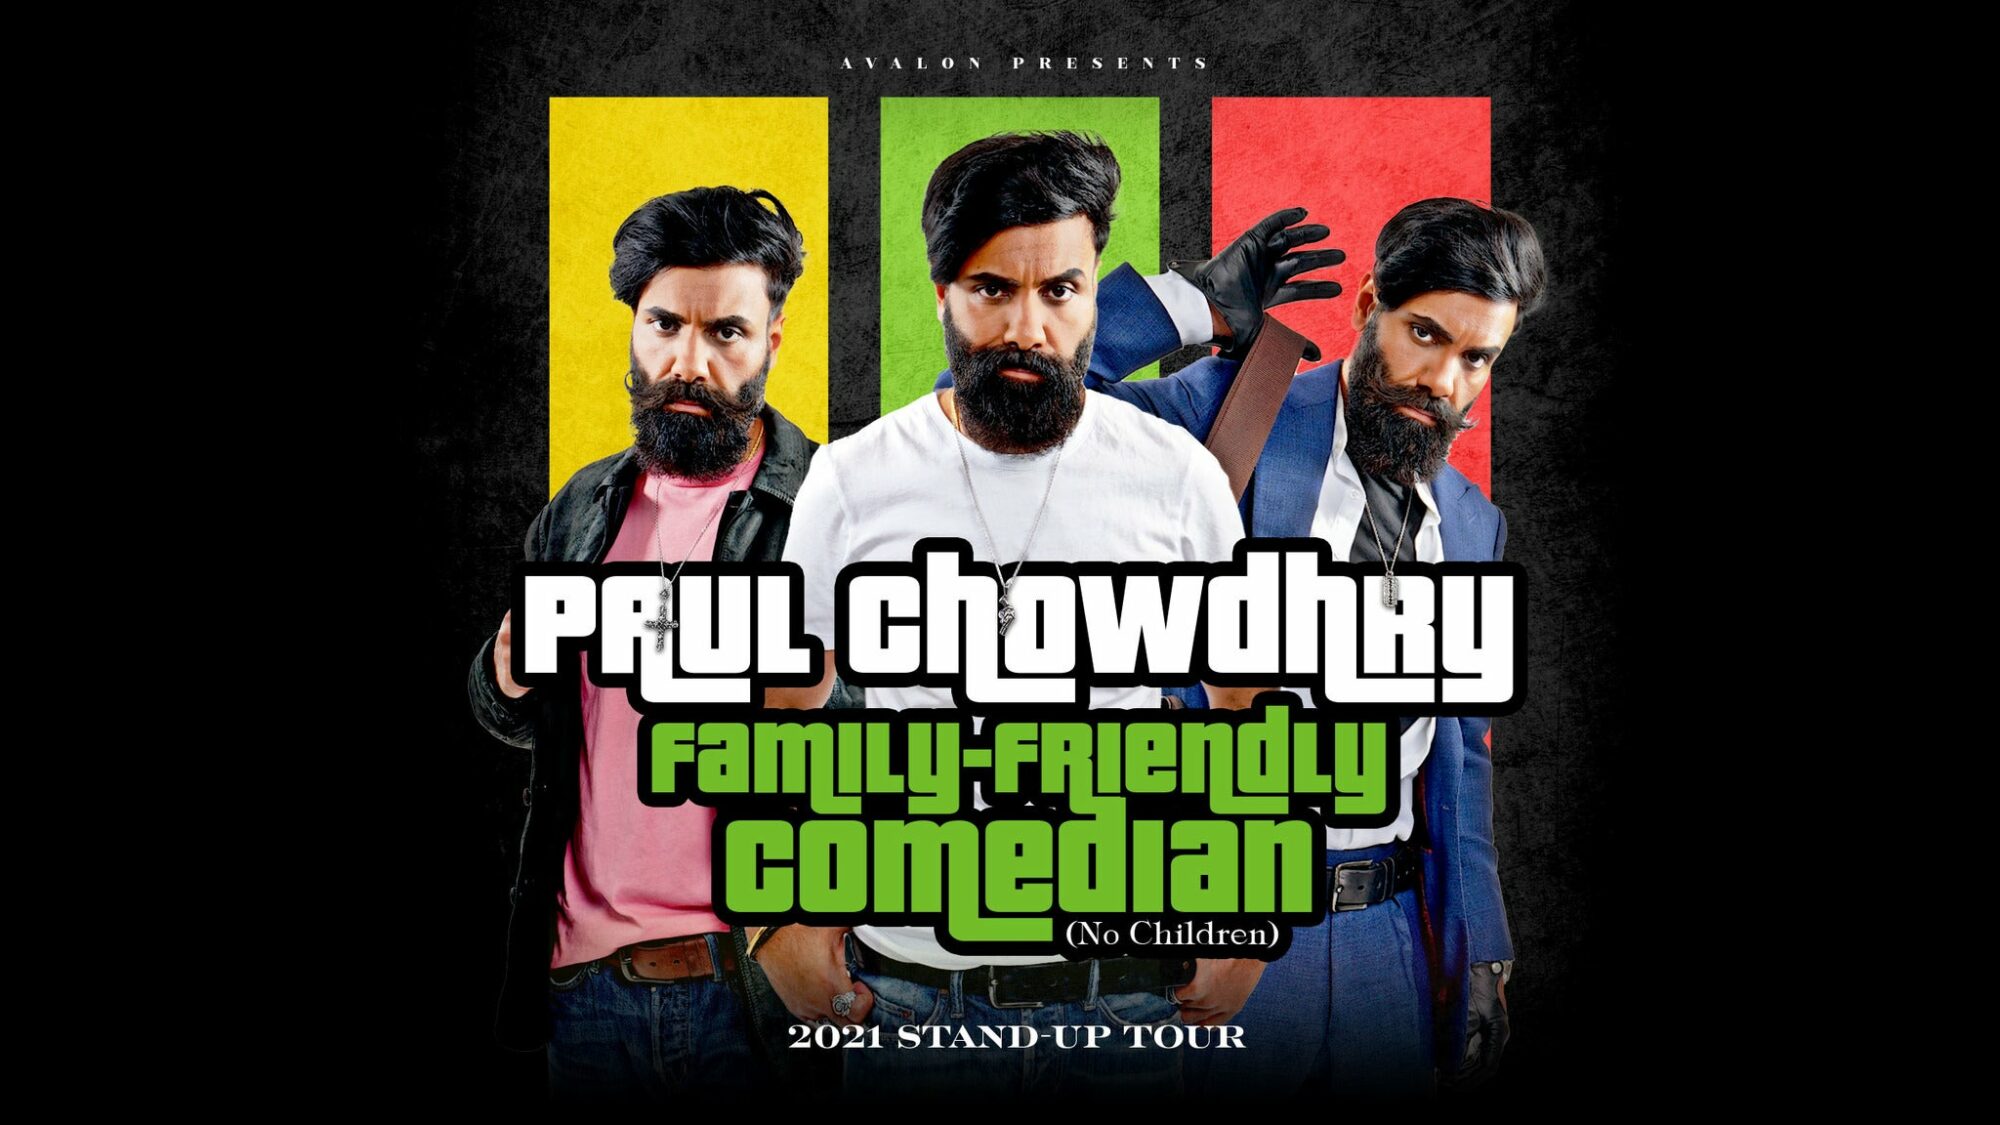 Image name Paul Chowdhry Family Friendly Comedian at St Georges Hall Bradford Bradford the 31 image from the post Paul Chowdhry: Family Friendly Comedian at St Georges Hall, Bradford, Bradford in Yorkshire.com.